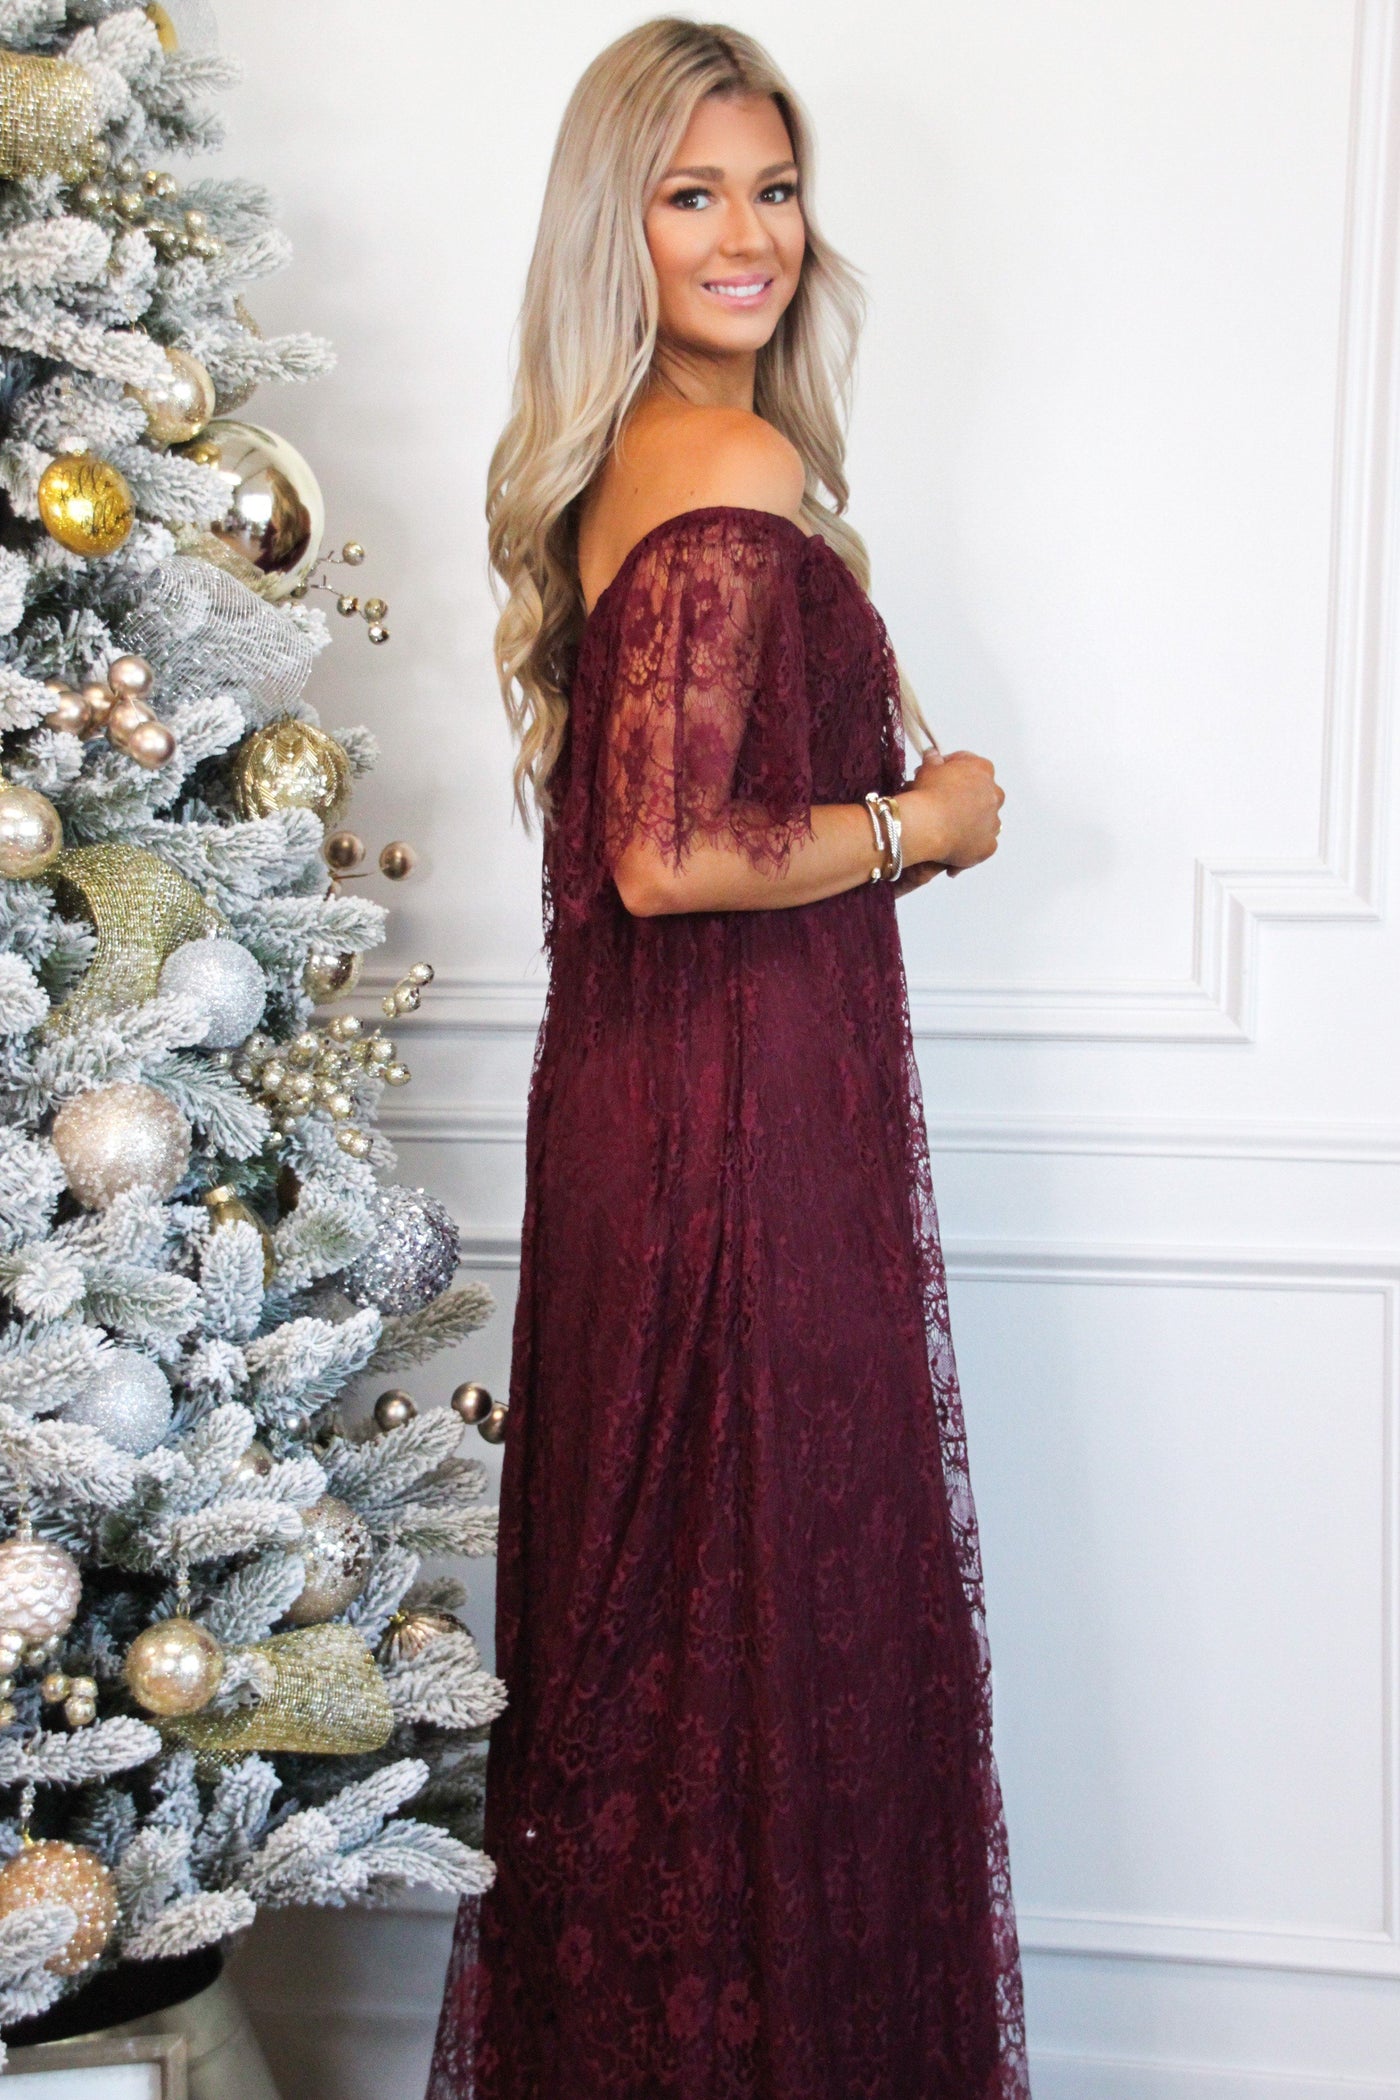 Enchanted to Meet You Lace Maxi Dress: Burgundy - Bella and Bloom Boutique